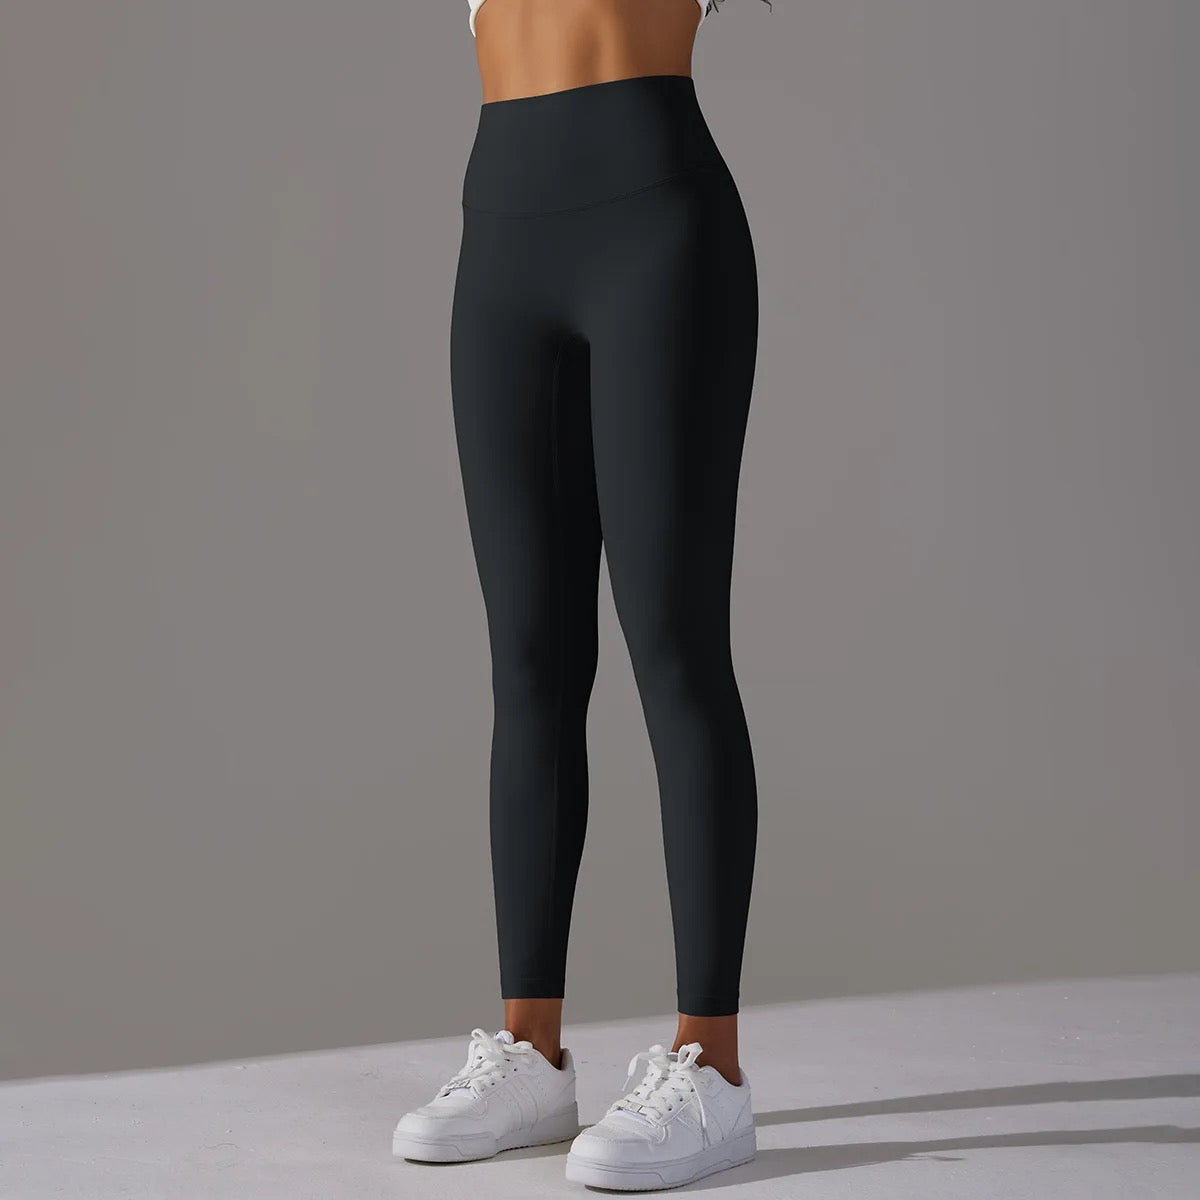 Black and White Volleyball Leggings